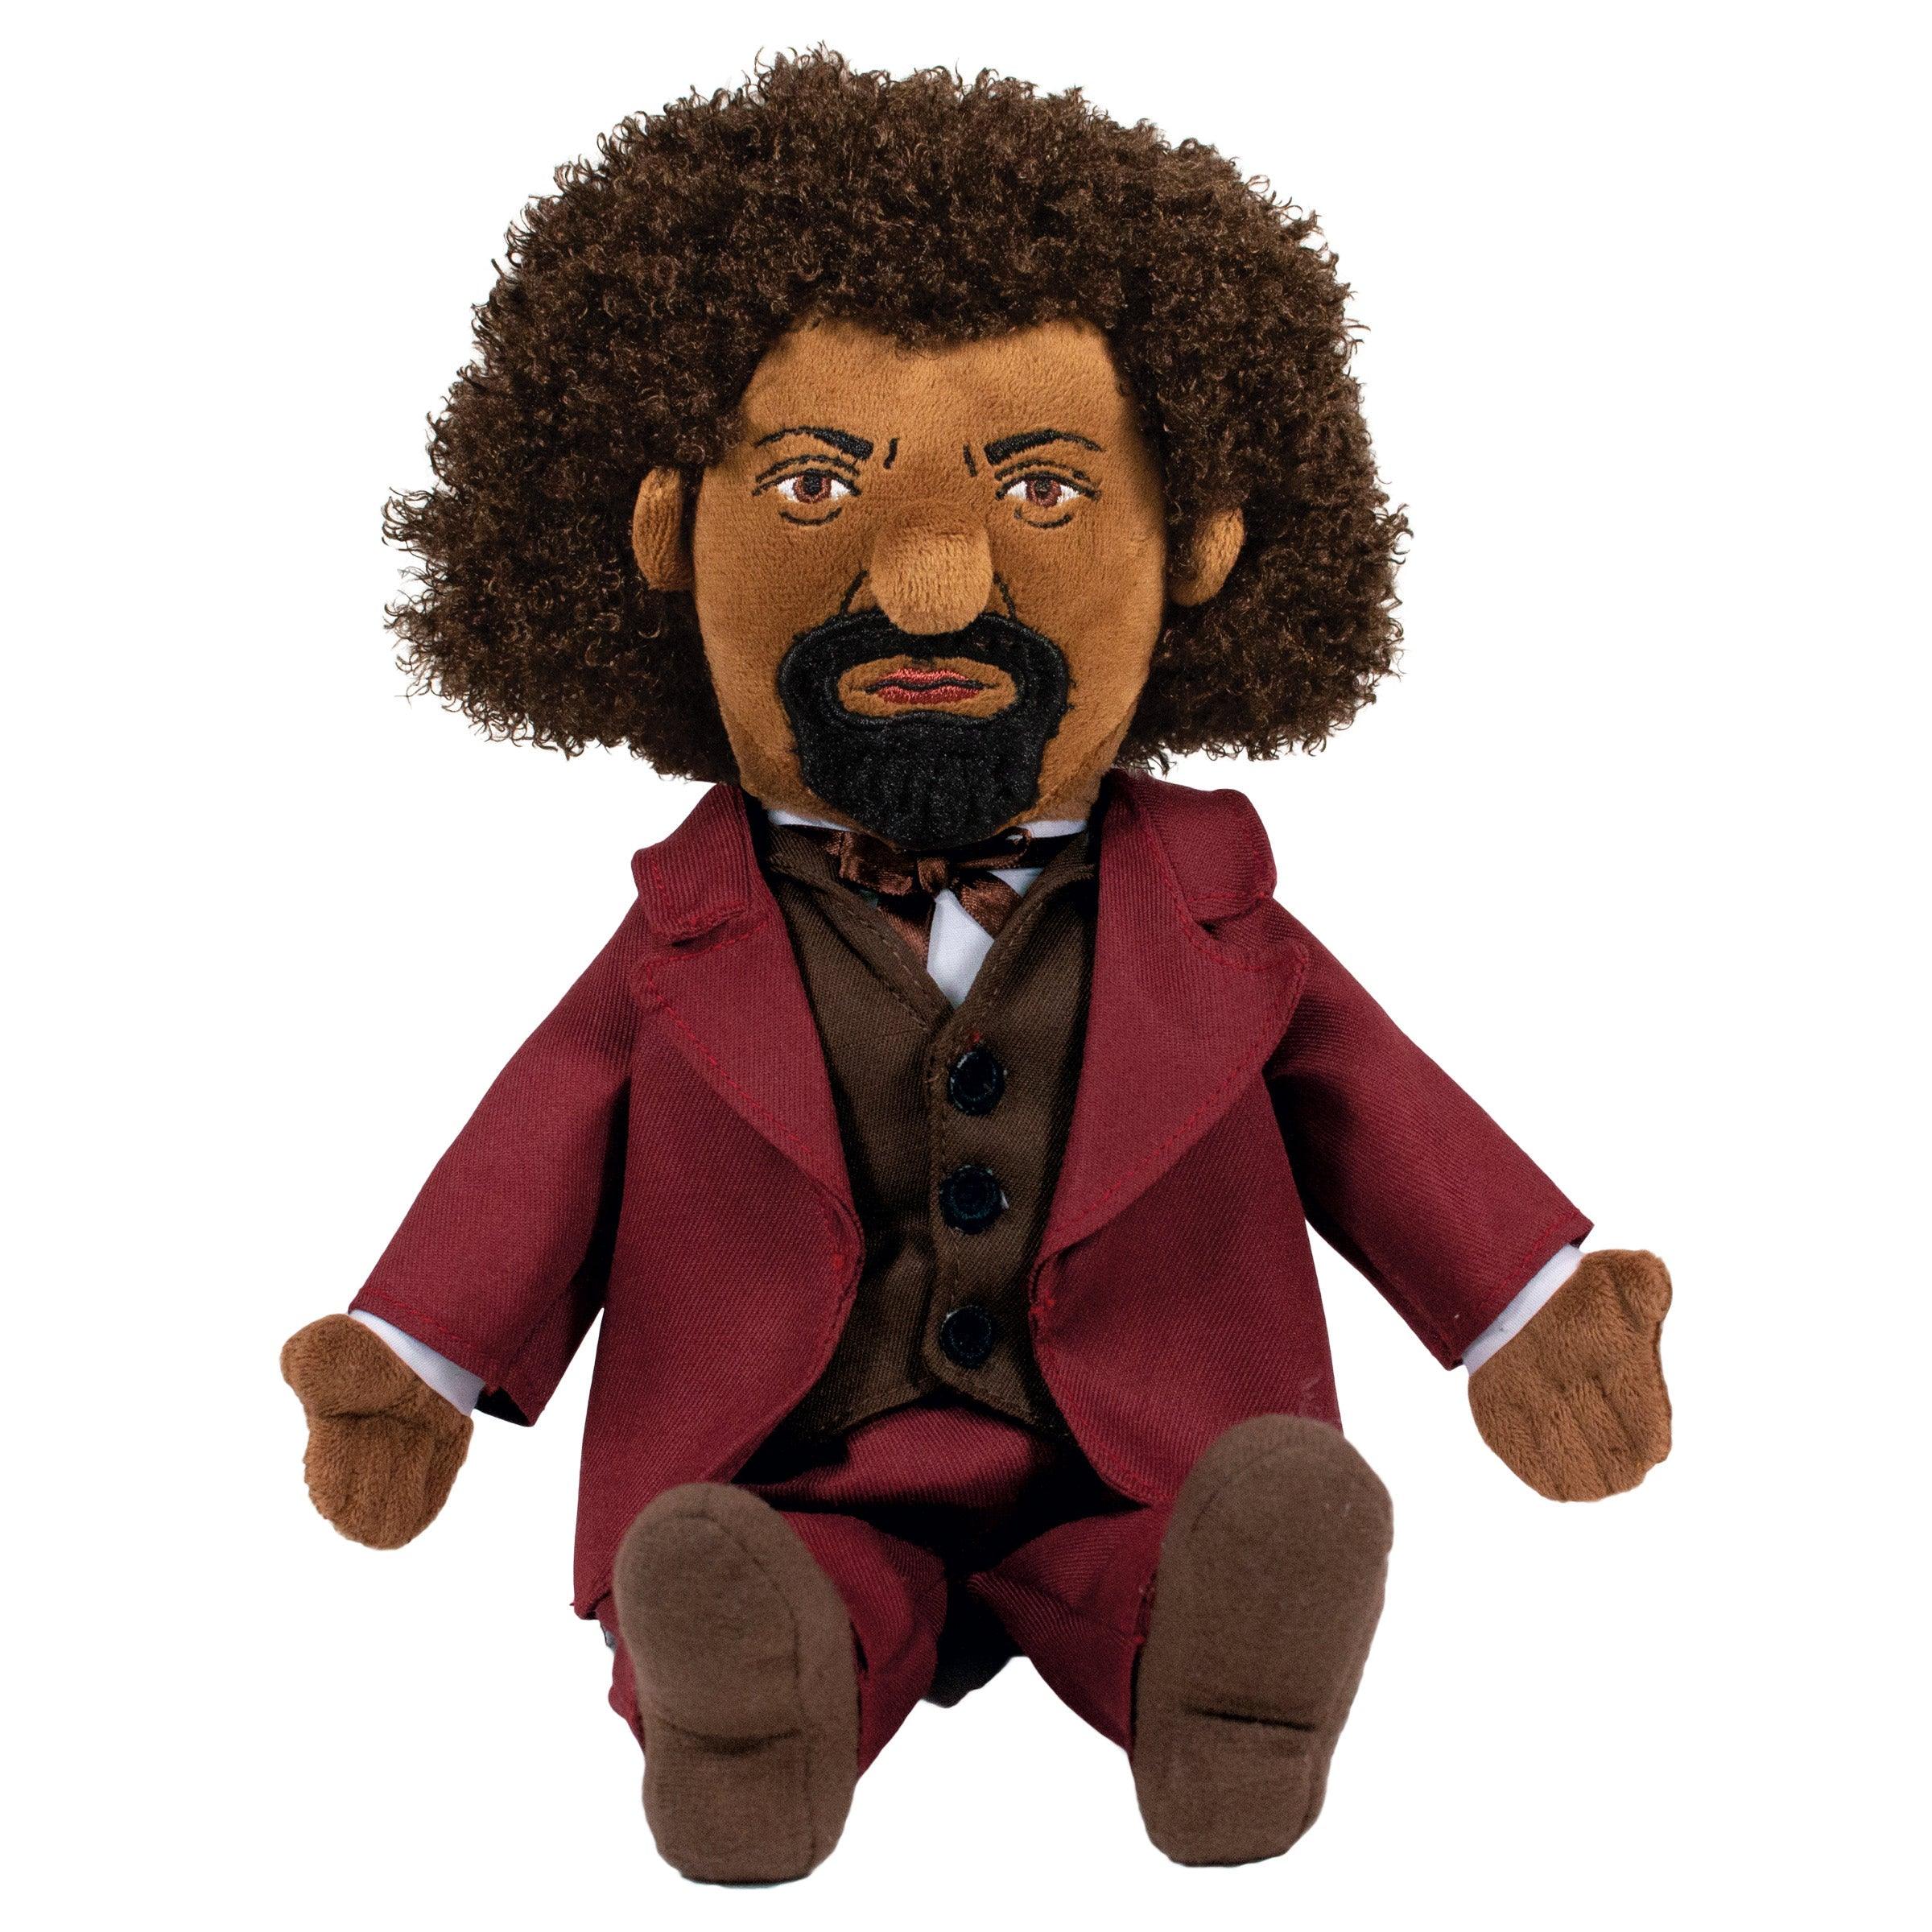 Product photo of Frederick Douglass Plush Doll, a novelty gift manufactured by The Unemployed Philosophers Guild.